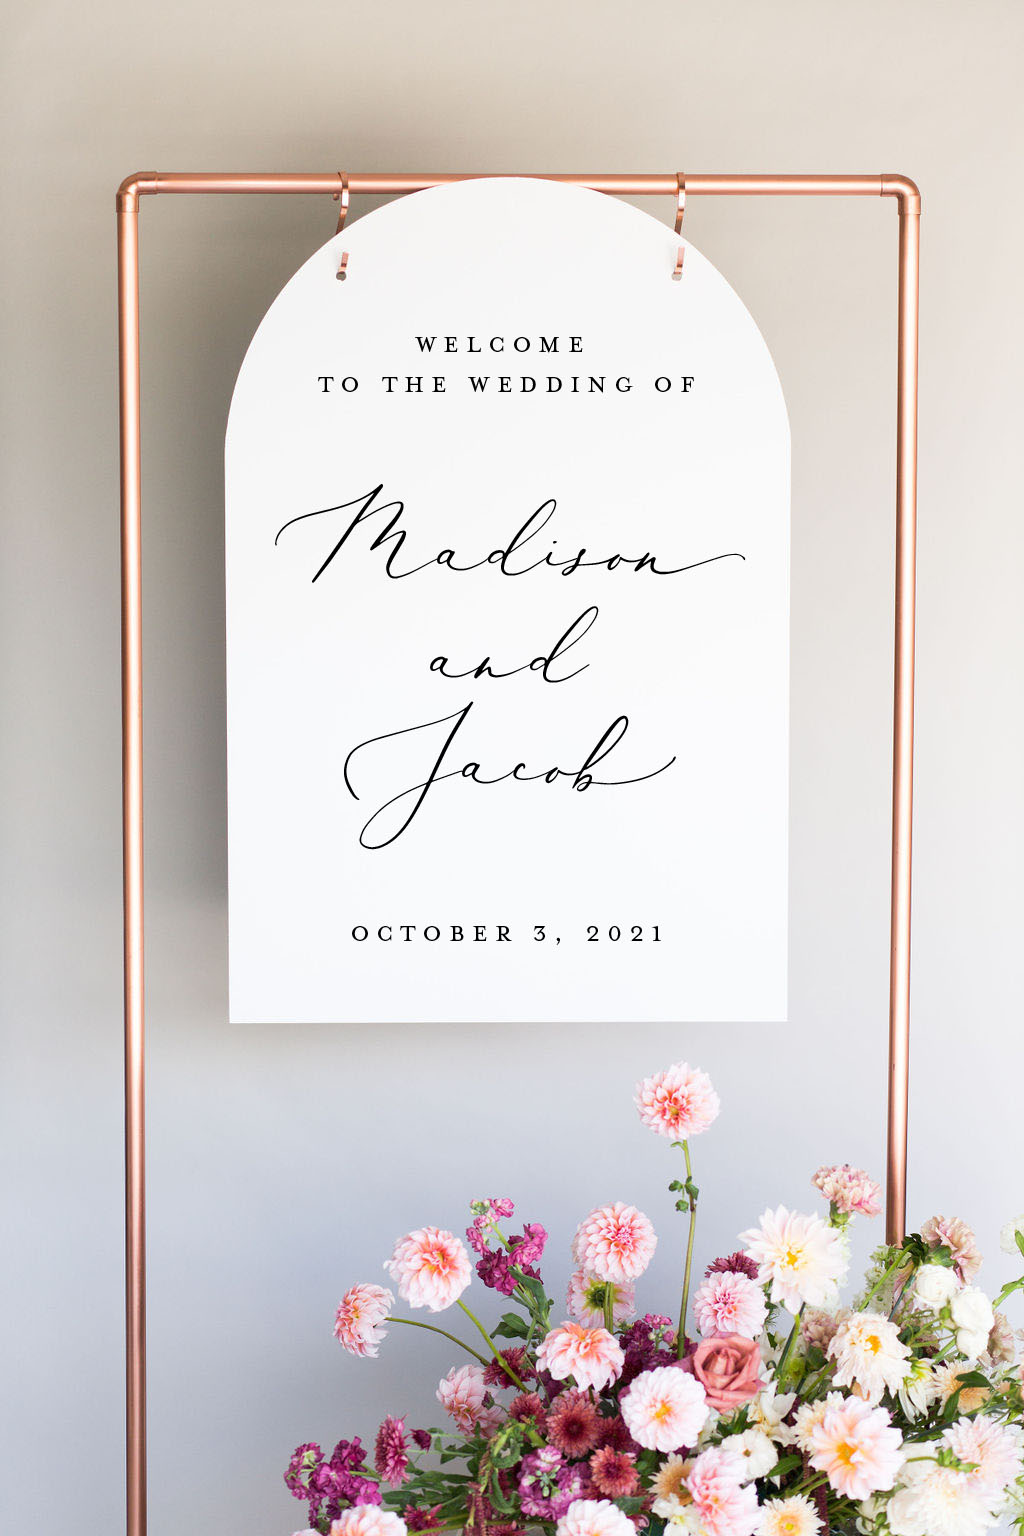 Acrylic Welcome To Our Wedding Signs | The Madison